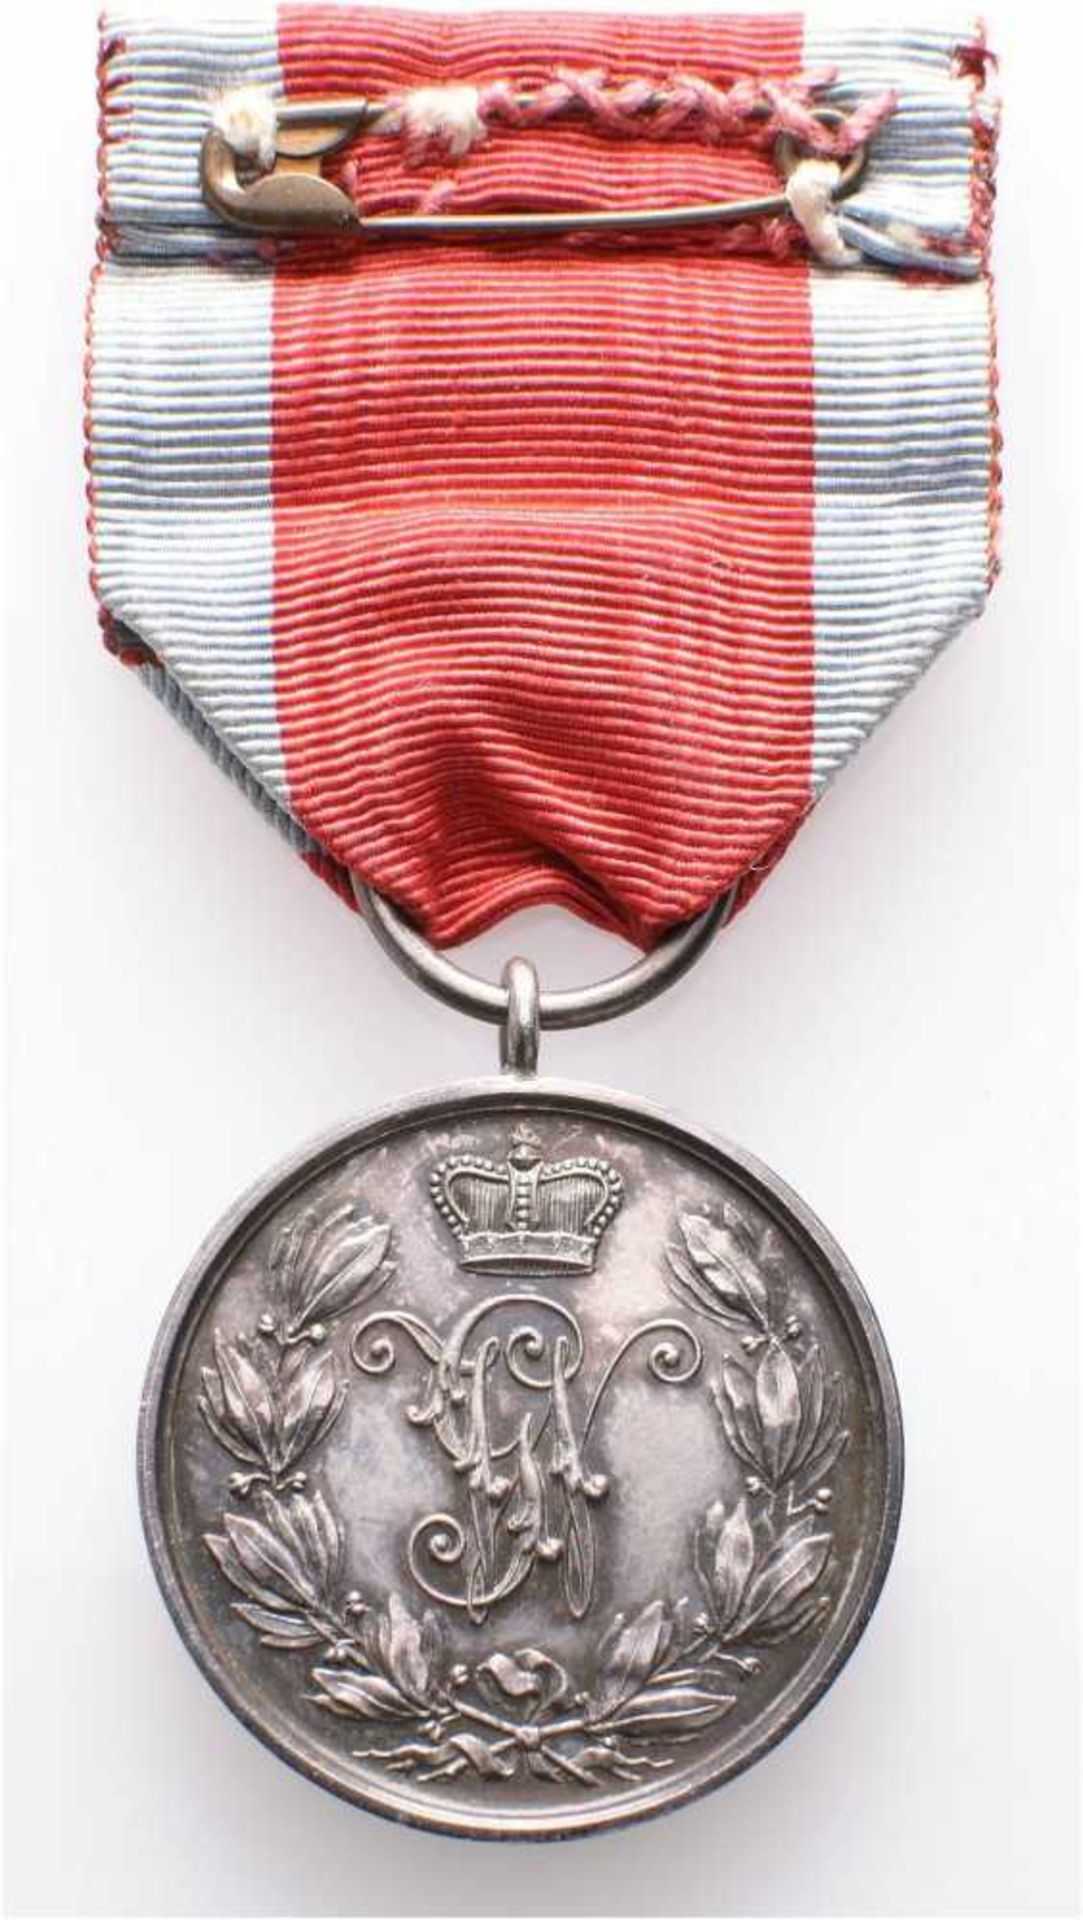 Schaumburg Lippe, silver military merit medal with enamelled Genevan cross on the volume, silver, OE - Image 2 of 2